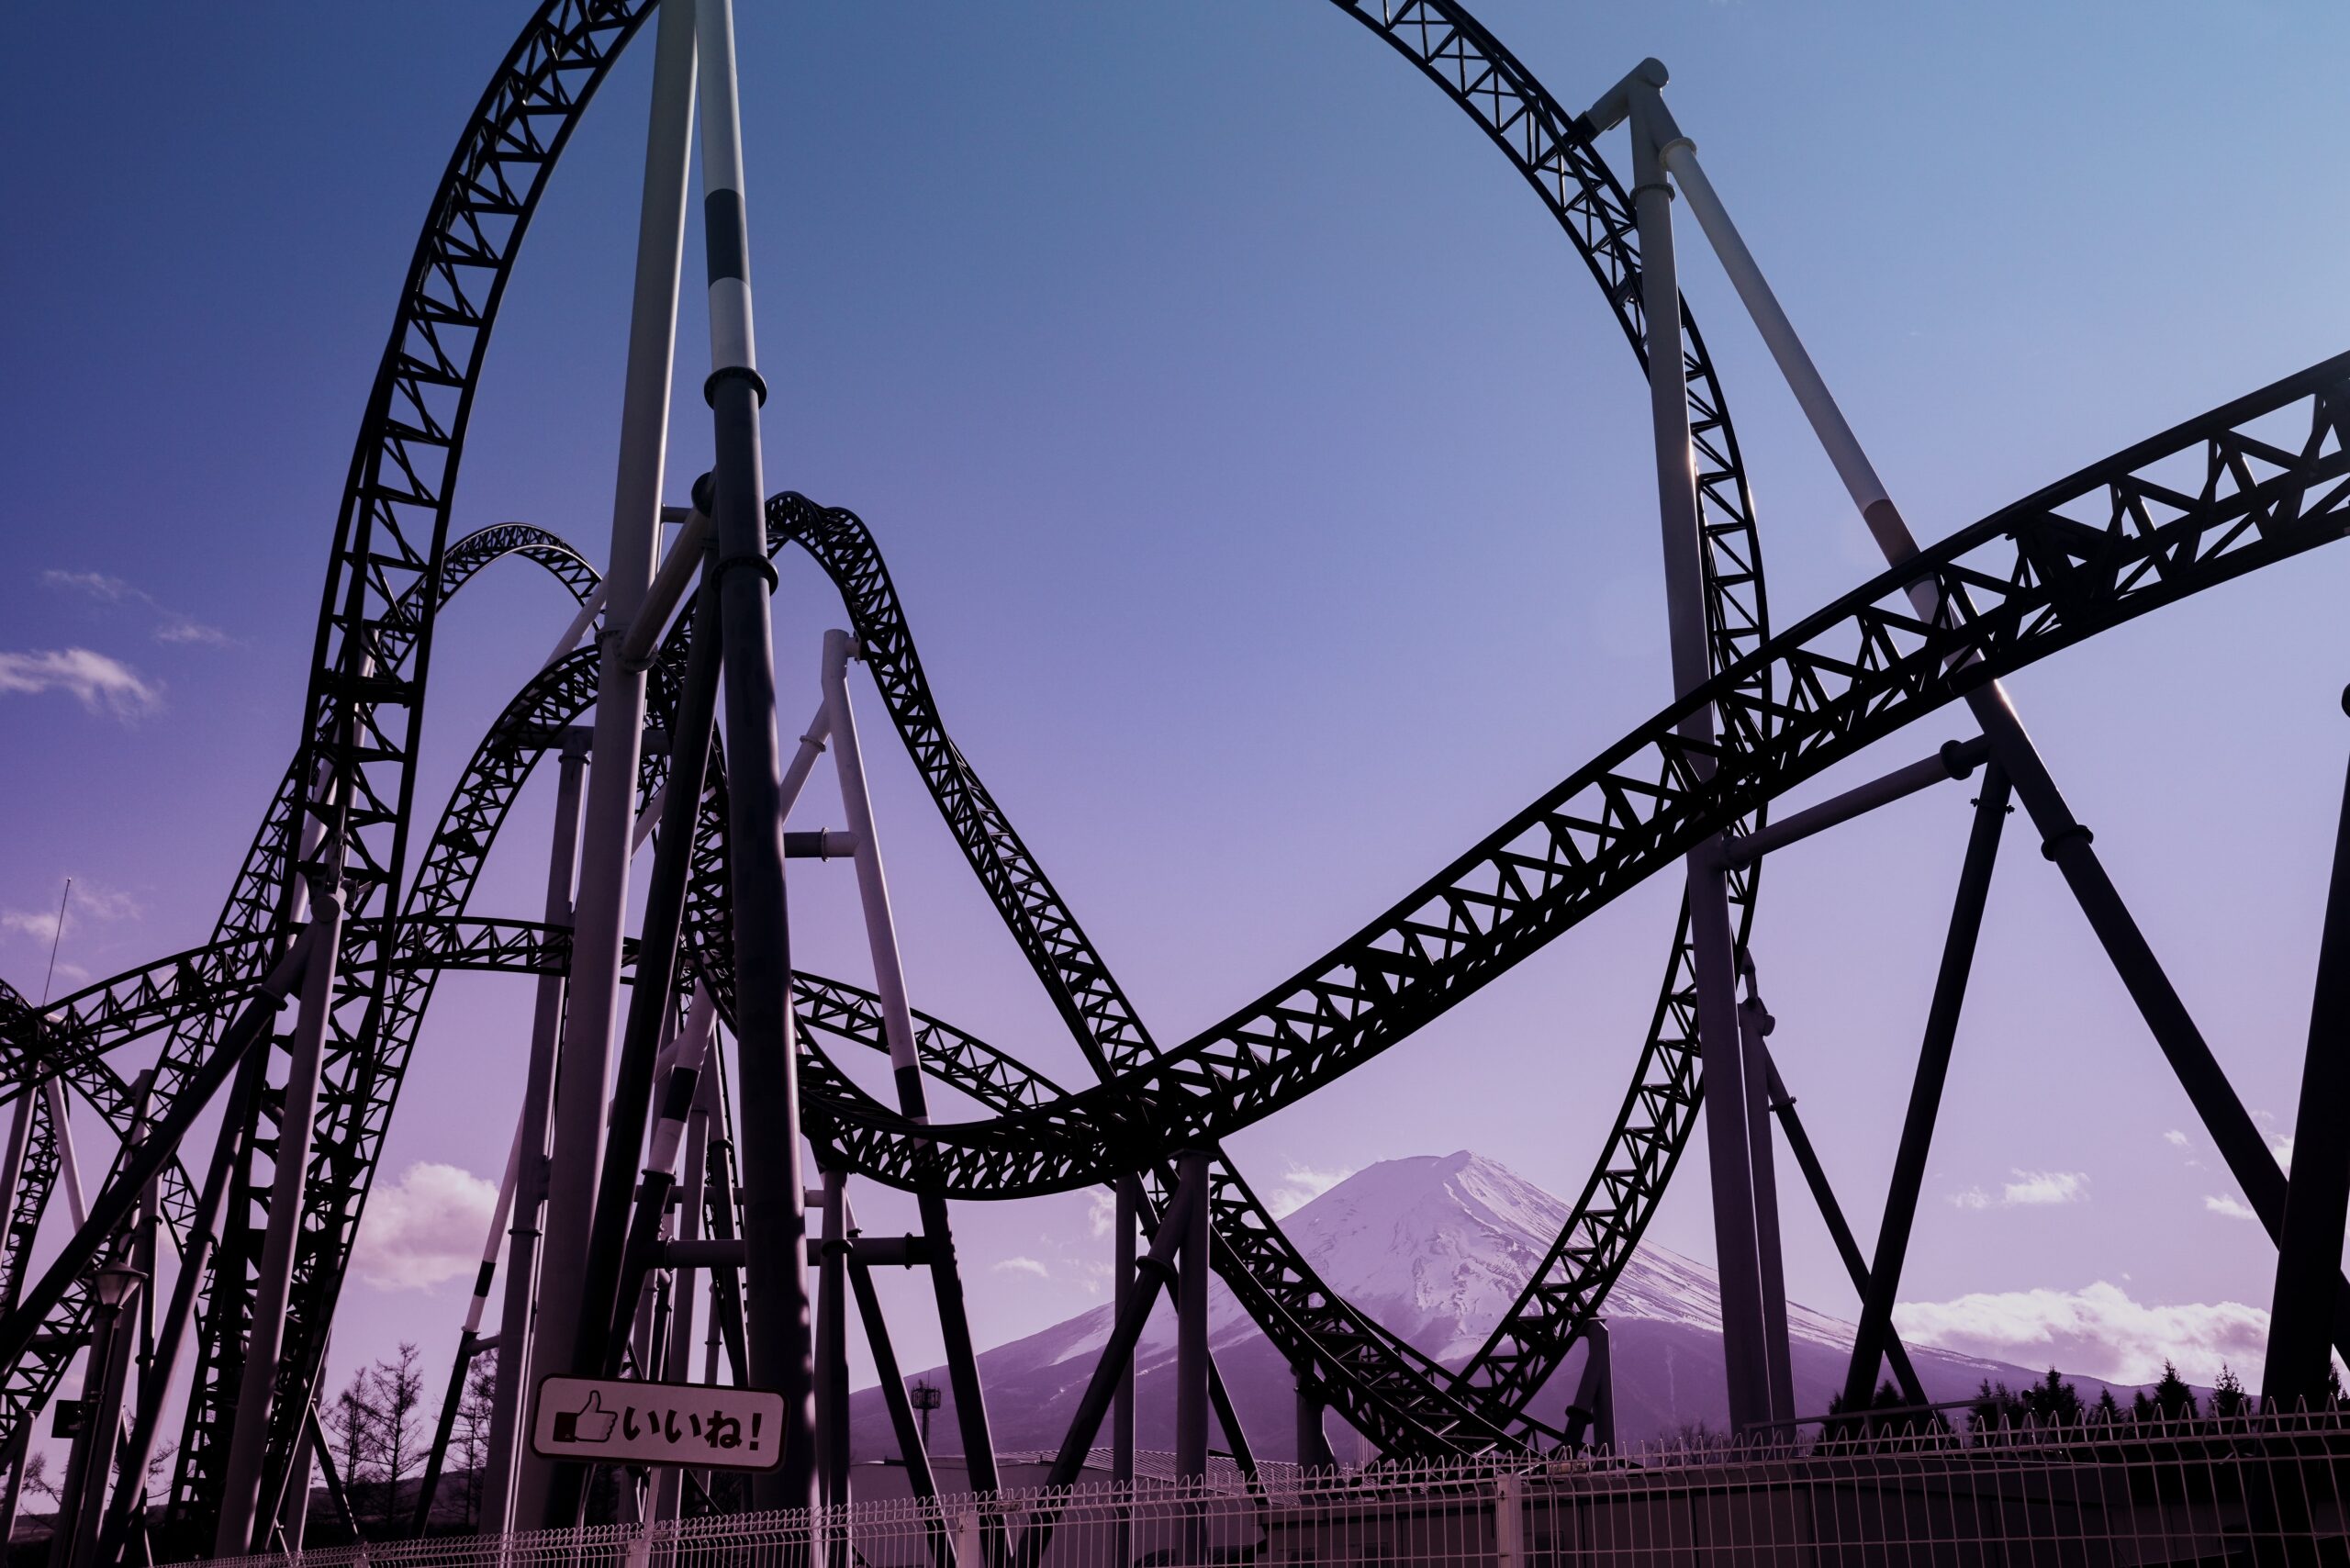 Building coping skills to withstand life’s roller coaster